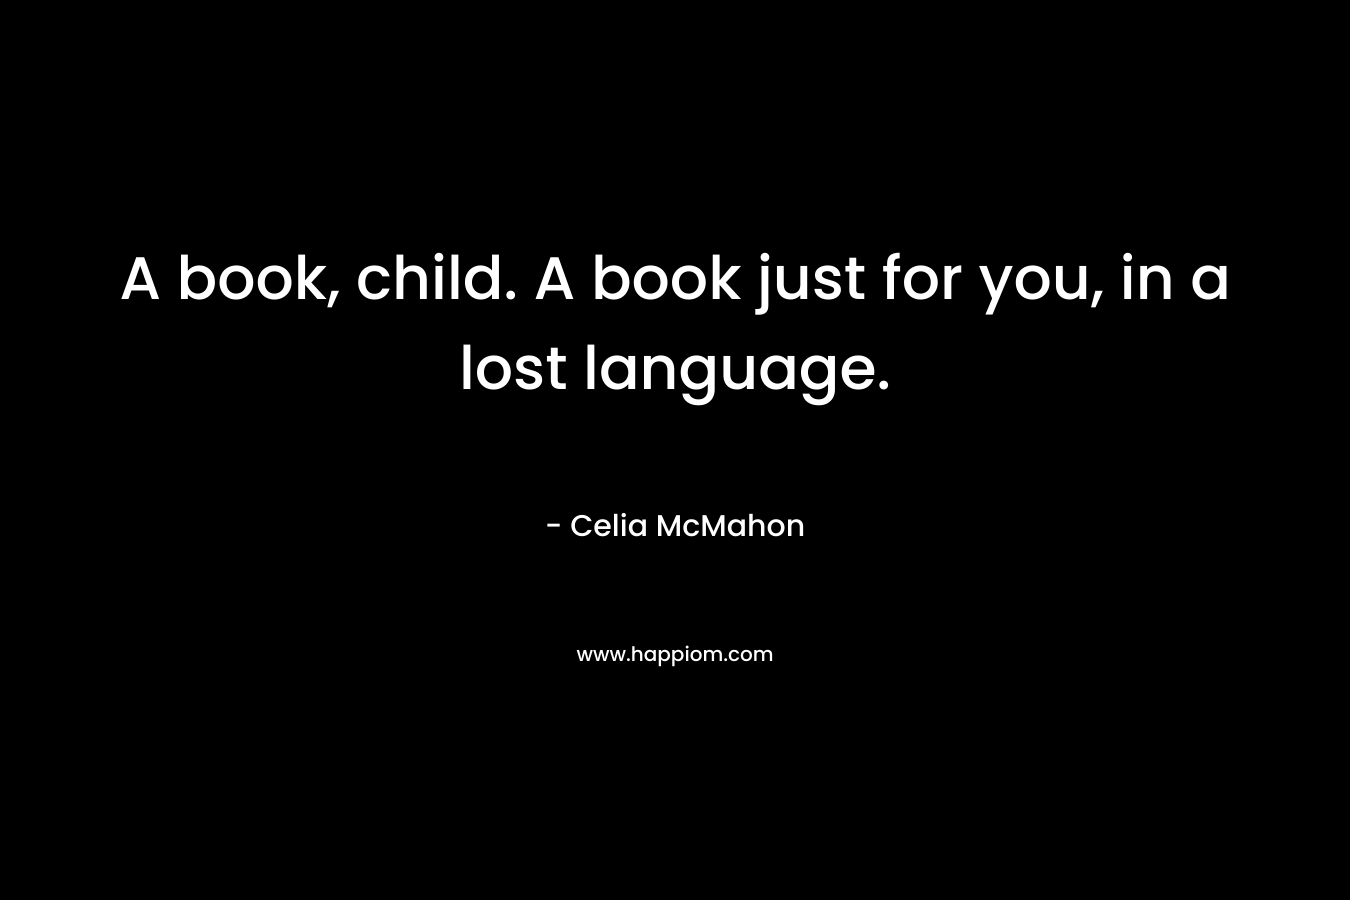 A book, child. A book just for you, in a lost language. – Celia McMahon